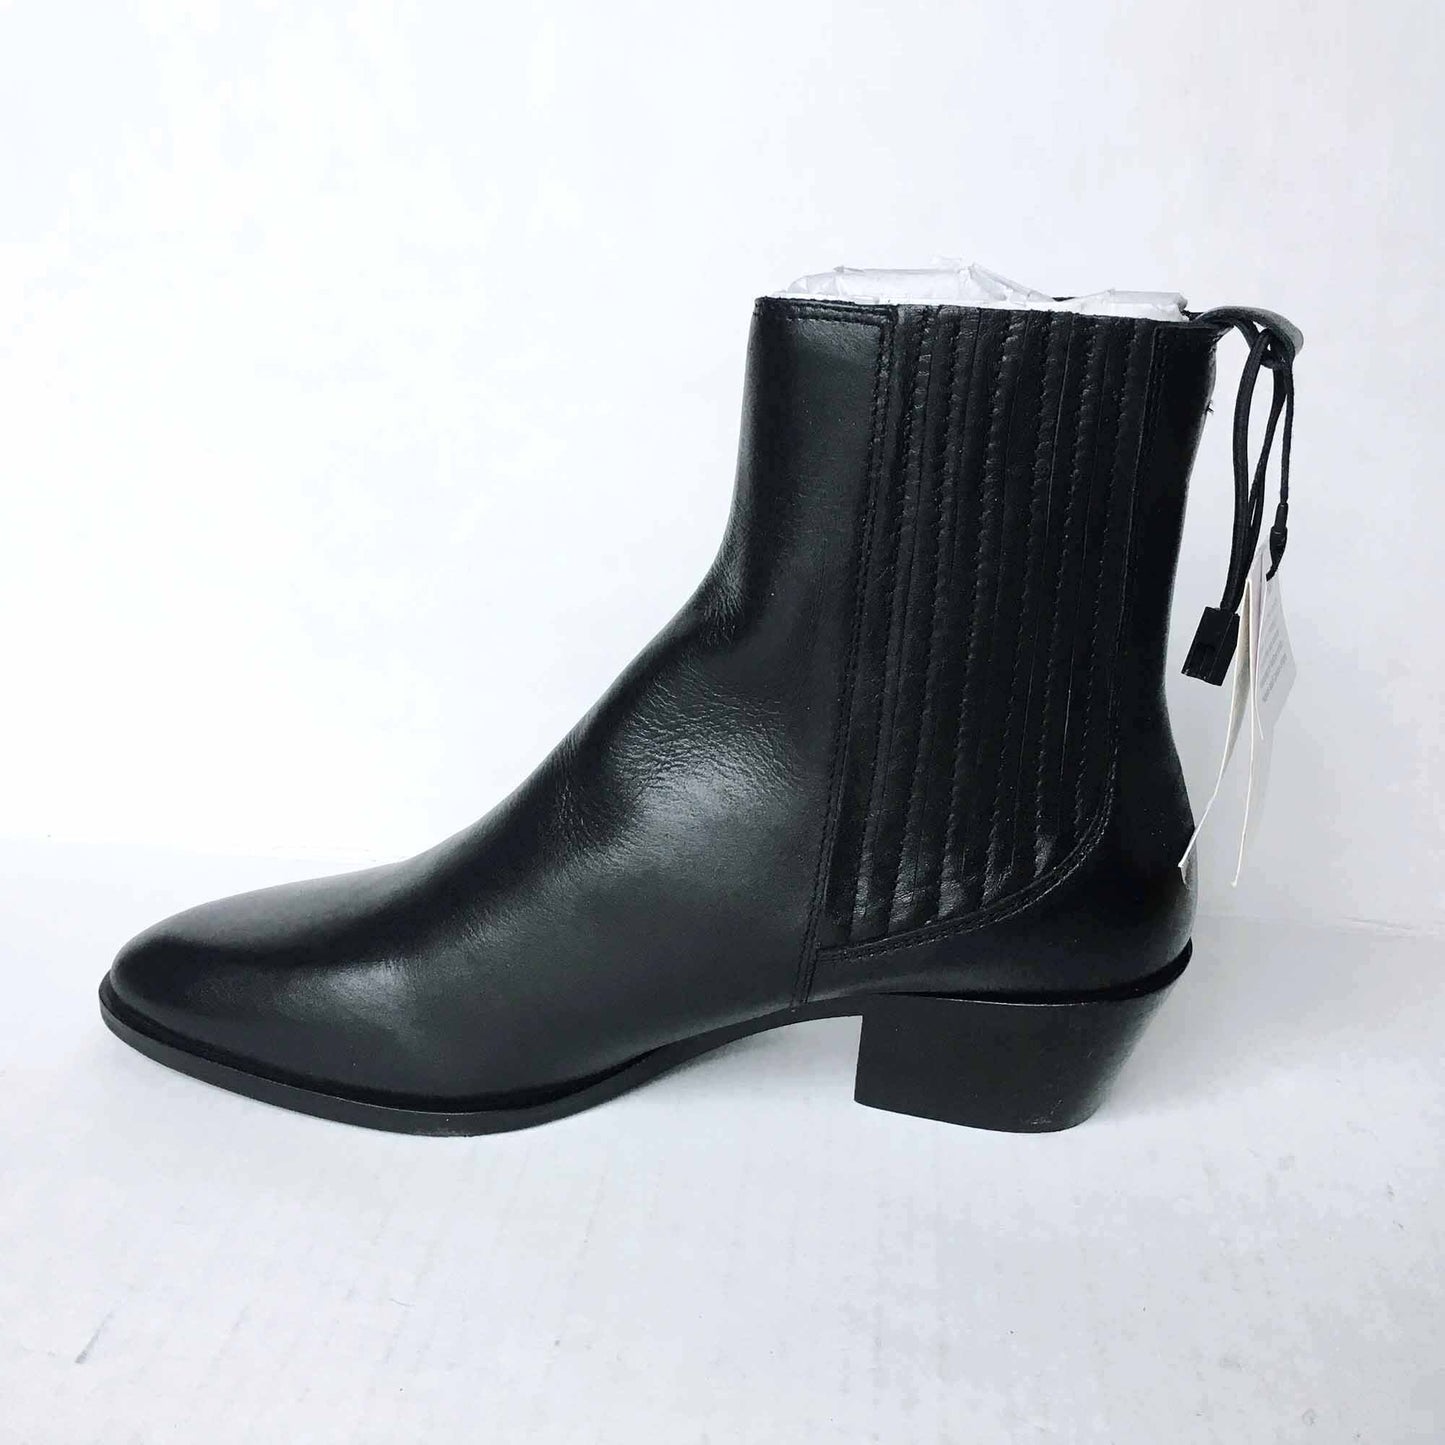 Zara black leather ankle boot - size 8